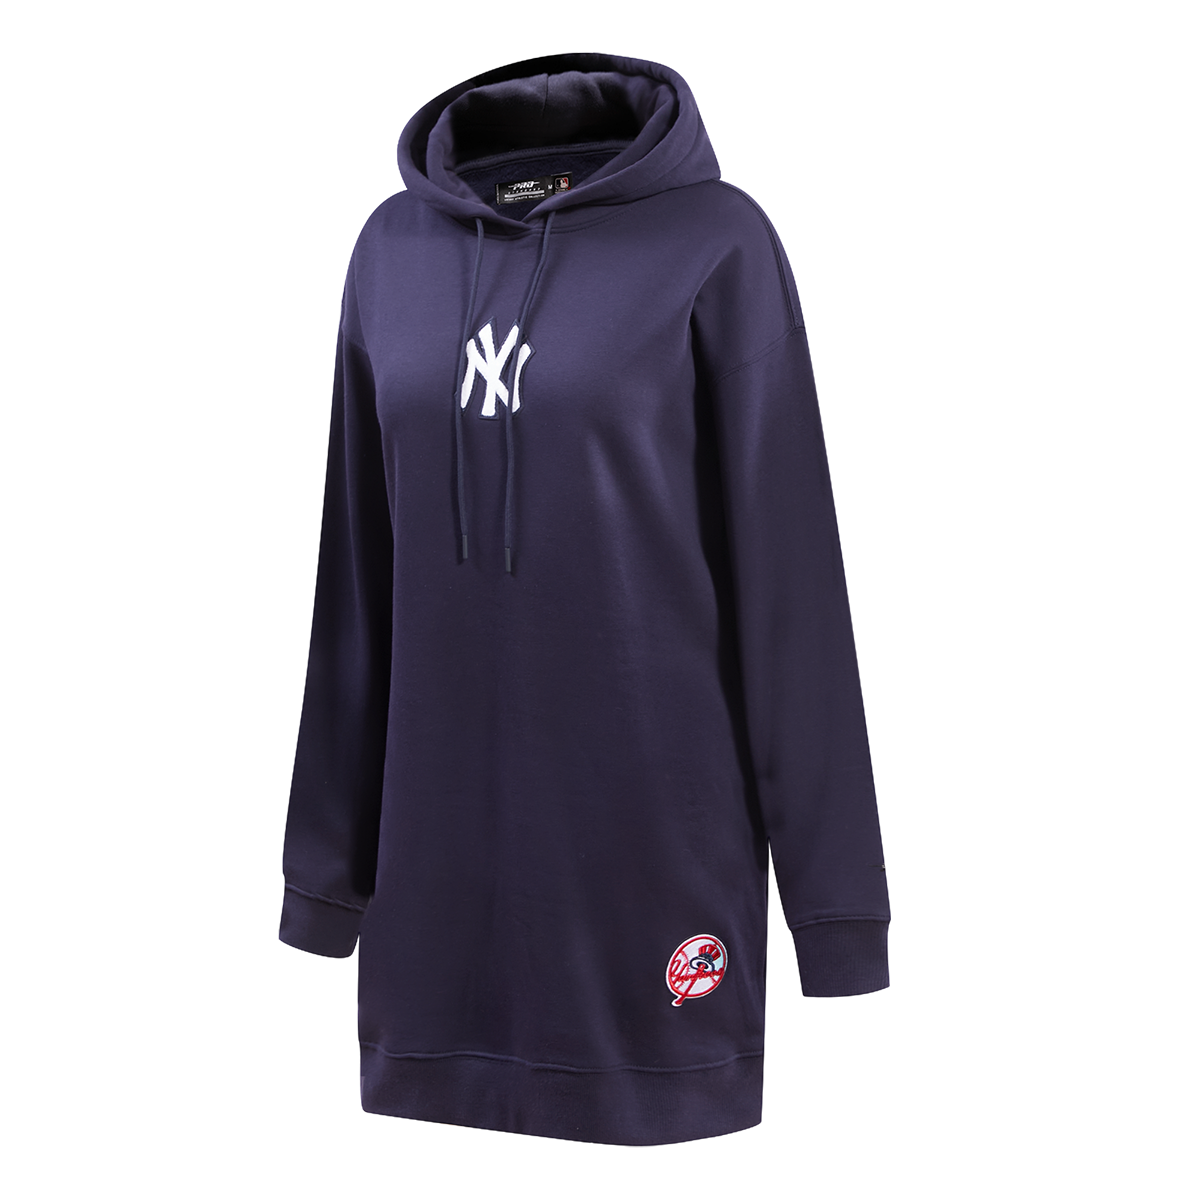 Official New York Yankees Nike Jackets, Yankees Pullovers, Track Jackets,  Coats